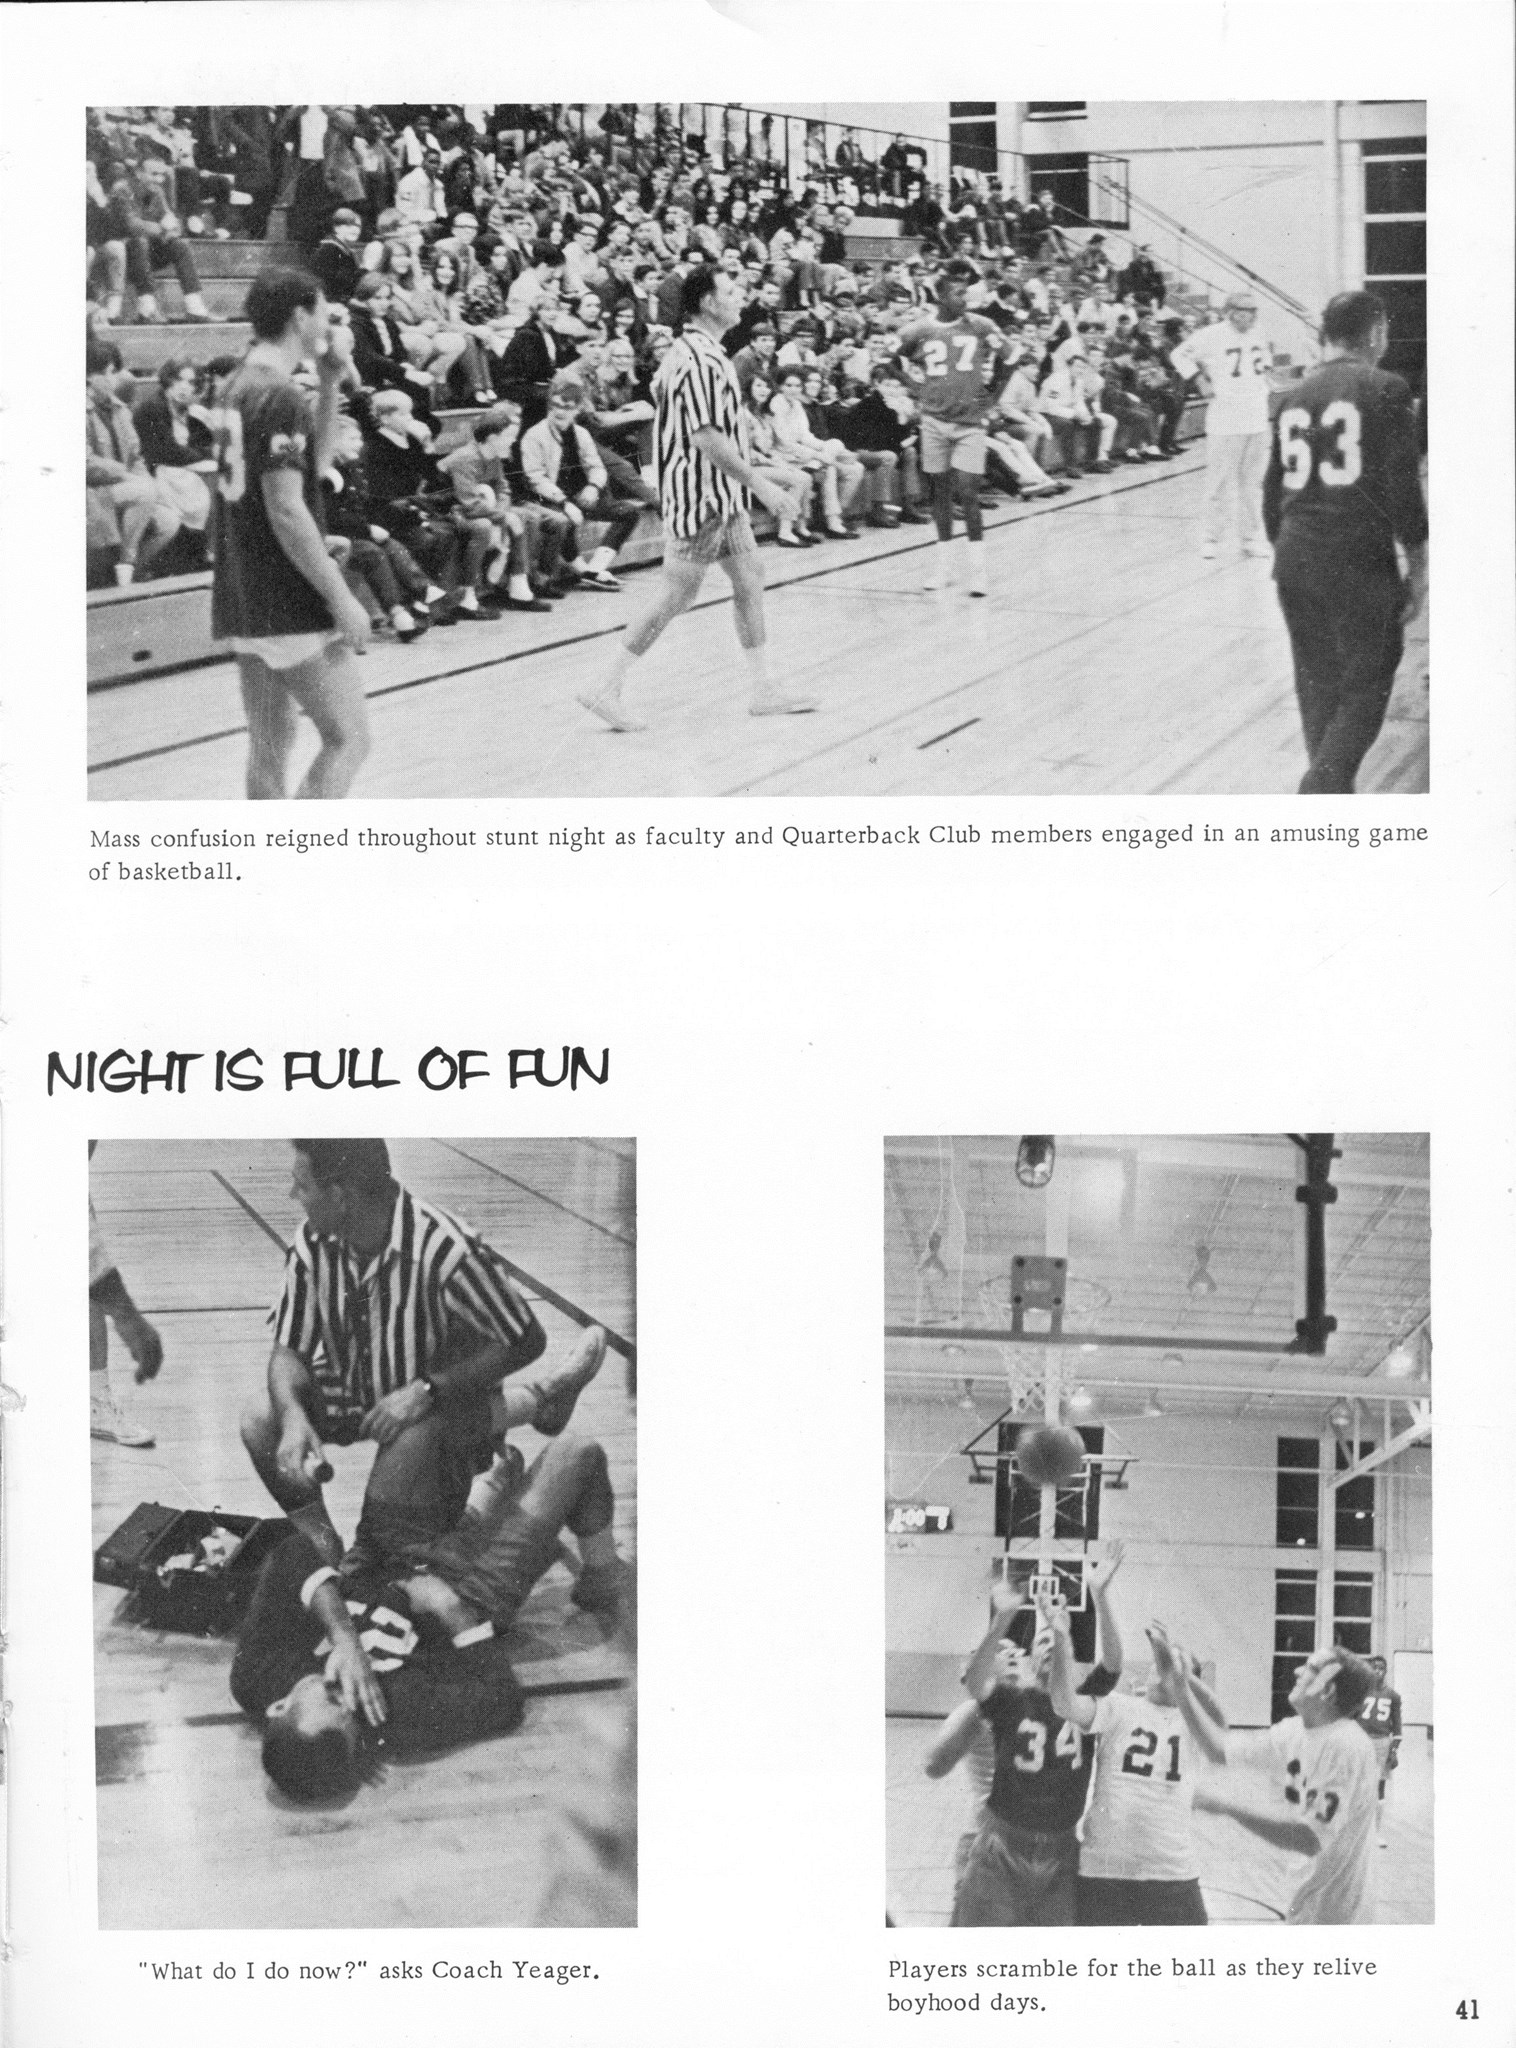 ../../../Images/Large/1968/Arclight-1968-pg0041.jpg